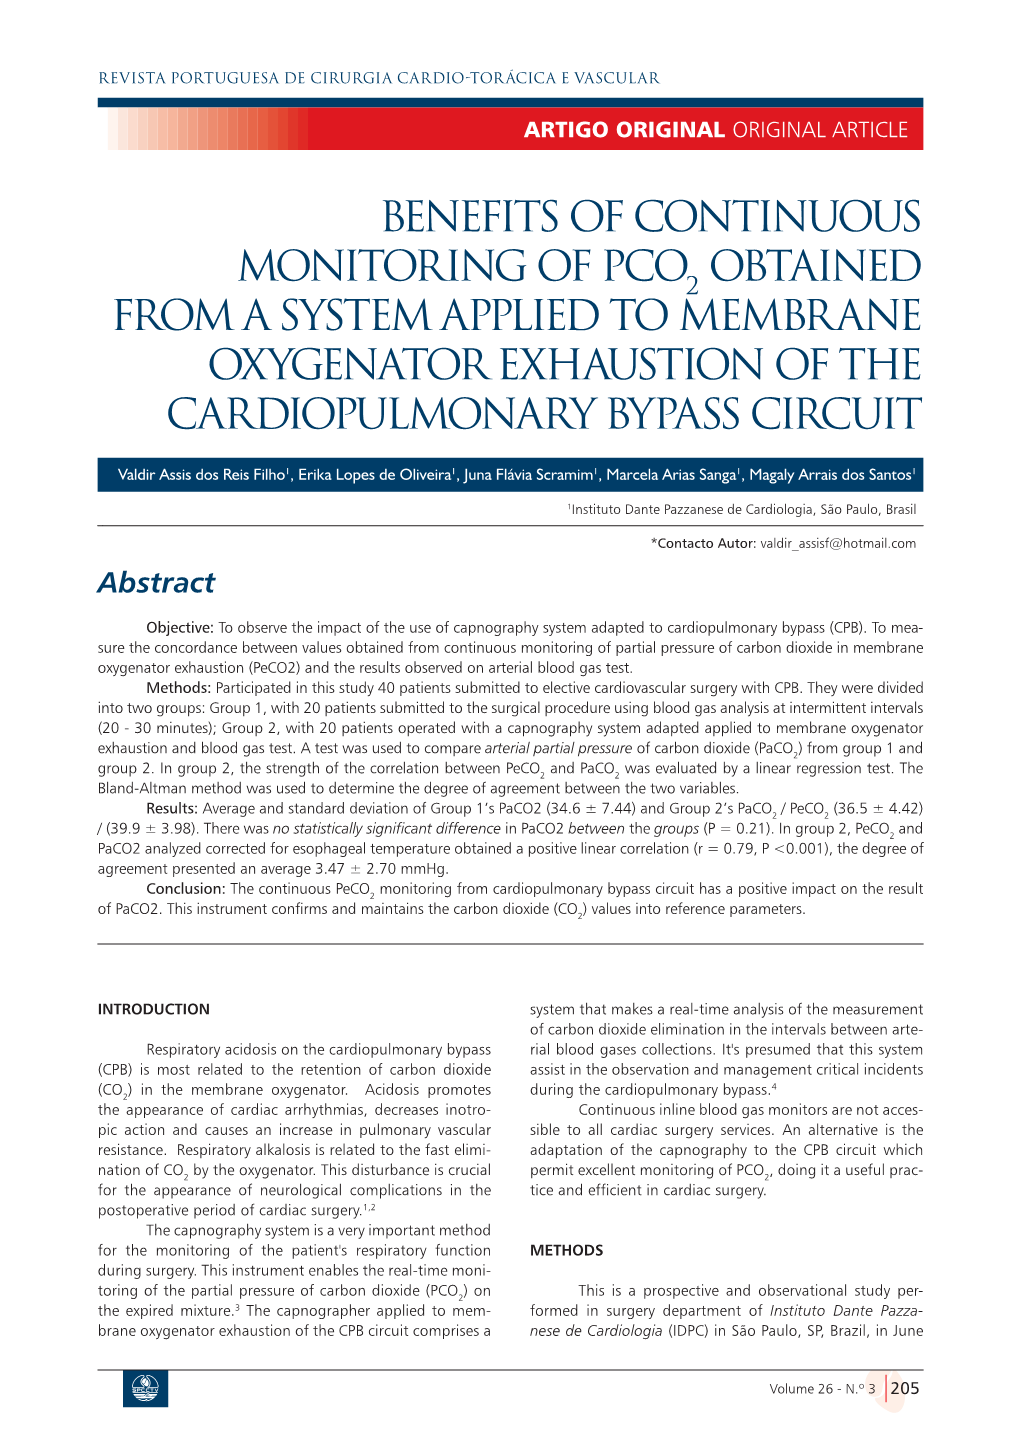 Benefits of Continuous Monitoring of PCO Obtained from a System Applied to Membrane Oxygenator Exhaustion of the Cardiopulmonary